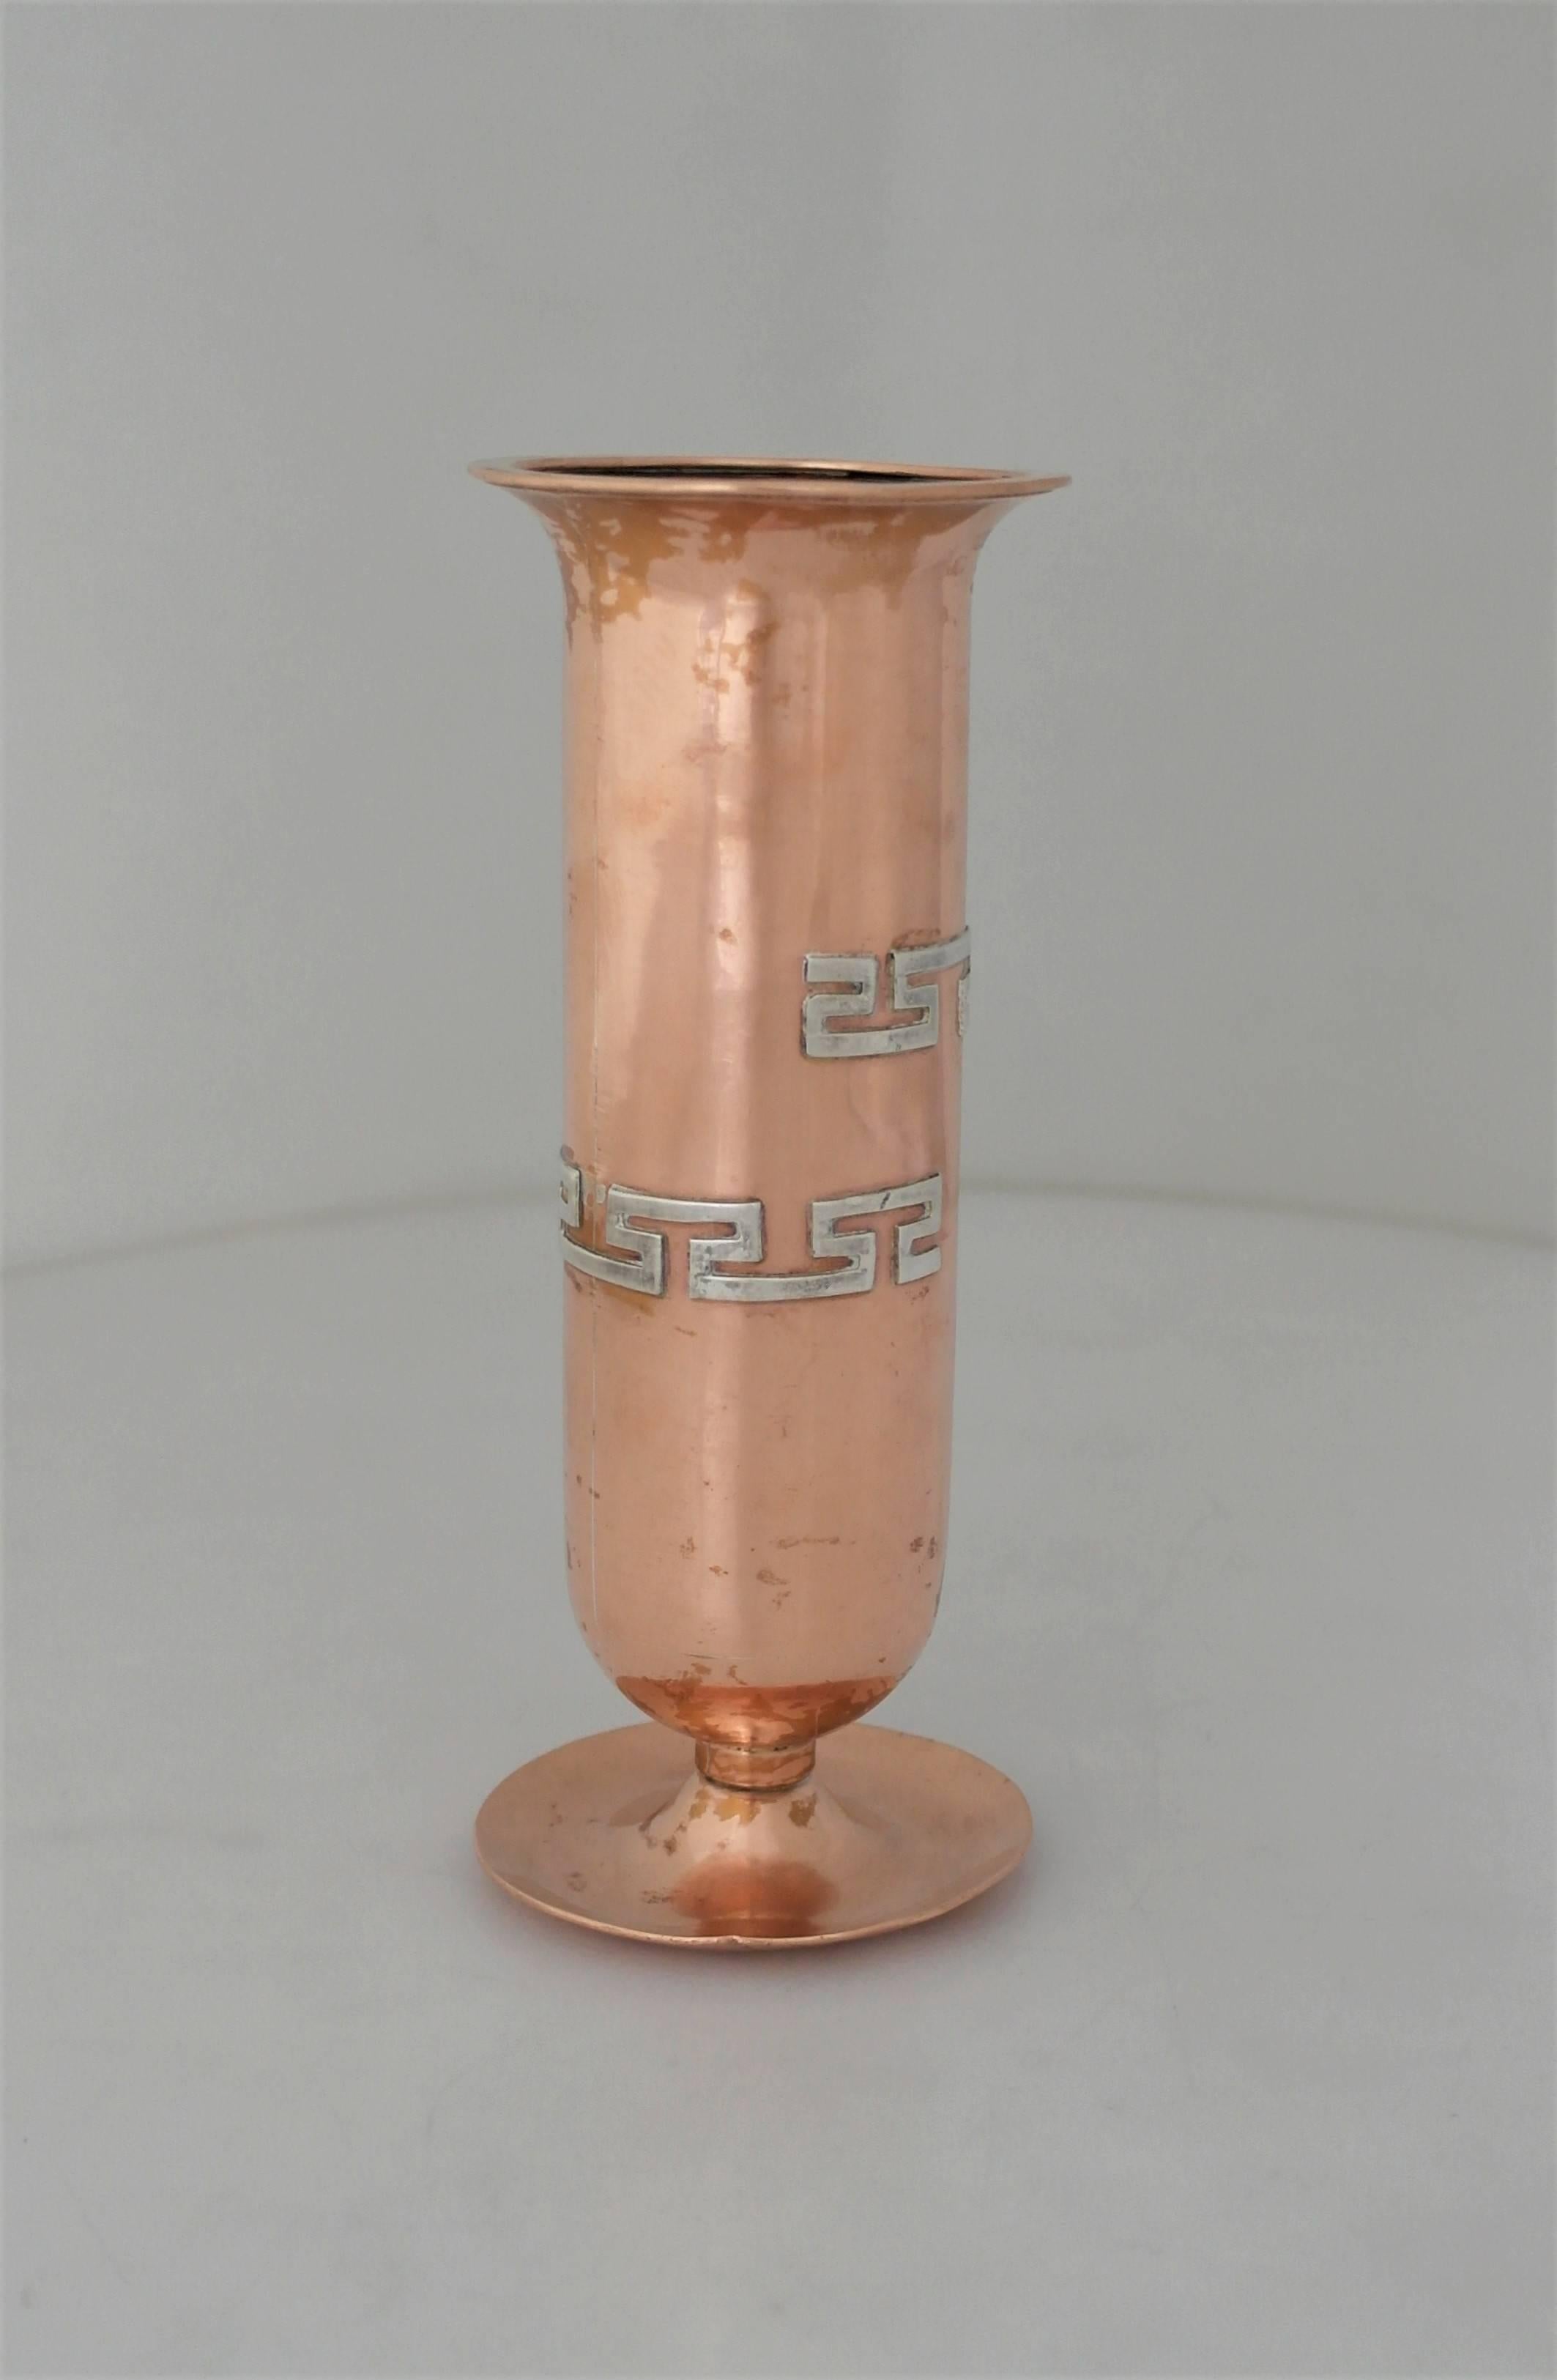 Being offered is a circa 1960 vase by renowned silversmith Victoria of Taxco, Mexico. Hand-wrought vase made of copper with an applied silver Pre-Columbian motif decoration, all resting on a circular raised base. Dimensions: 7 1/4" height x